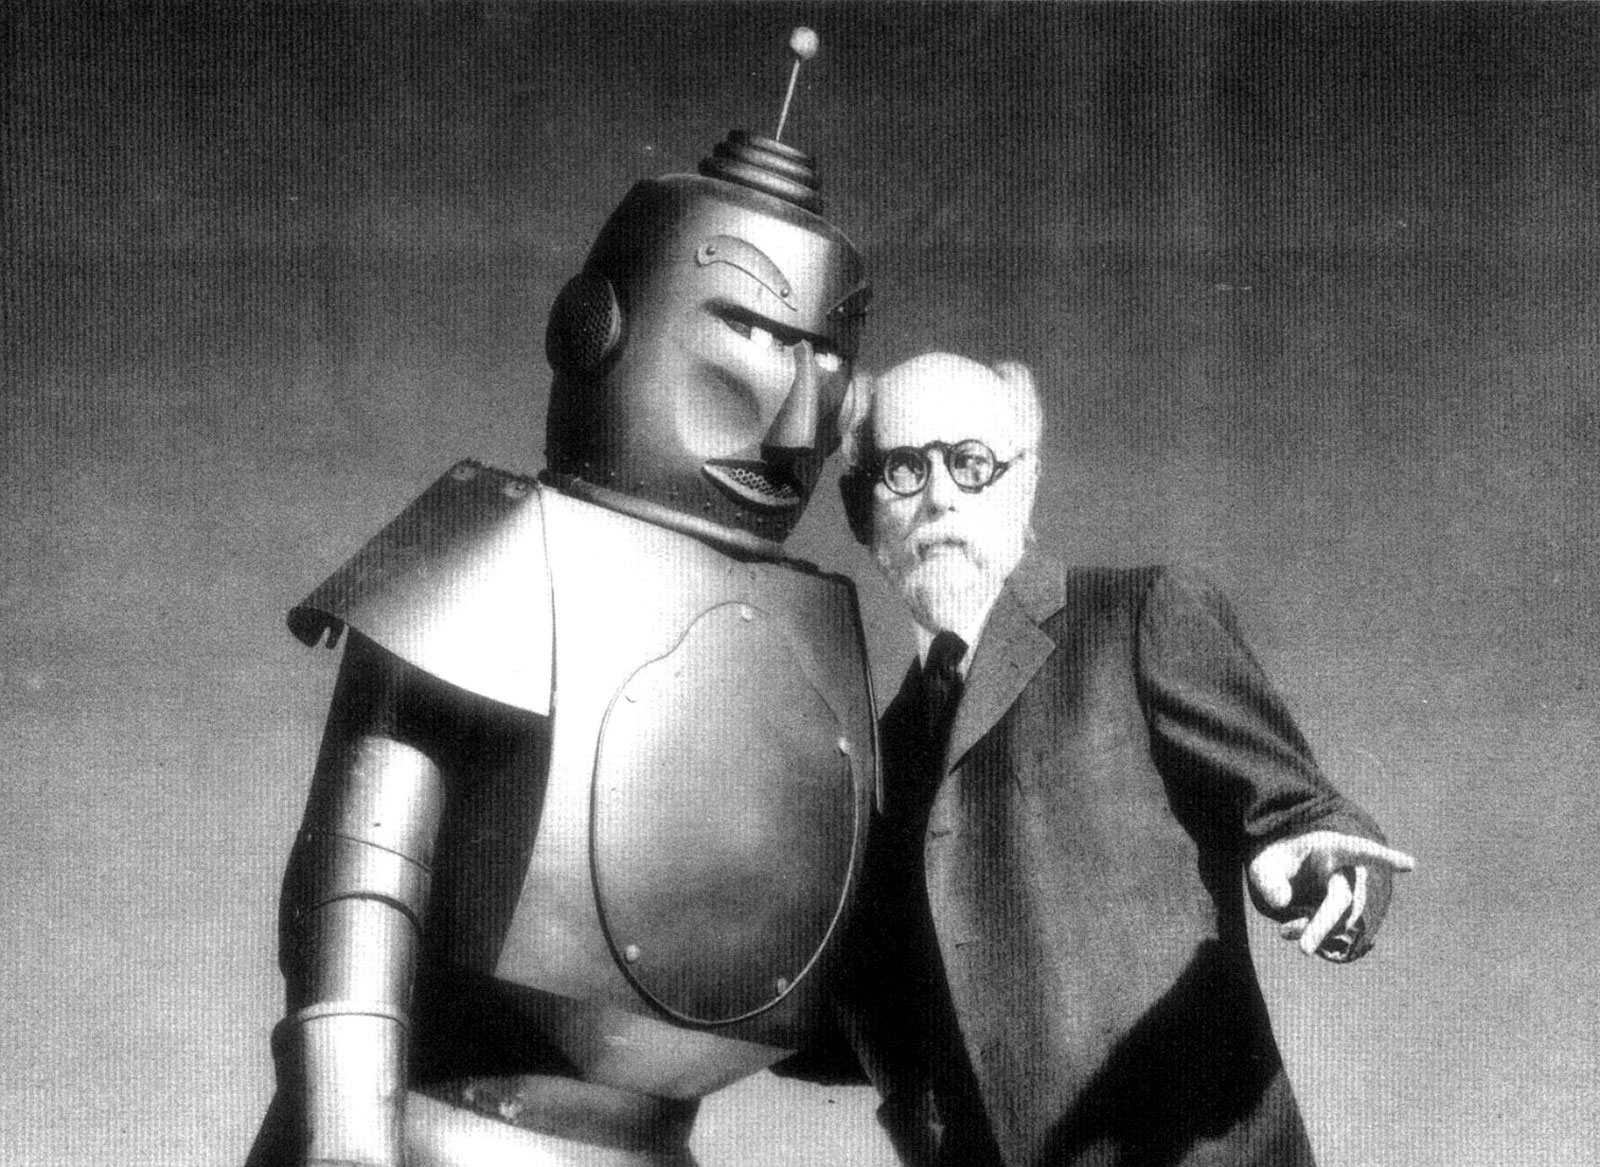 Robot from the movie The Monster and The Ape (1945).